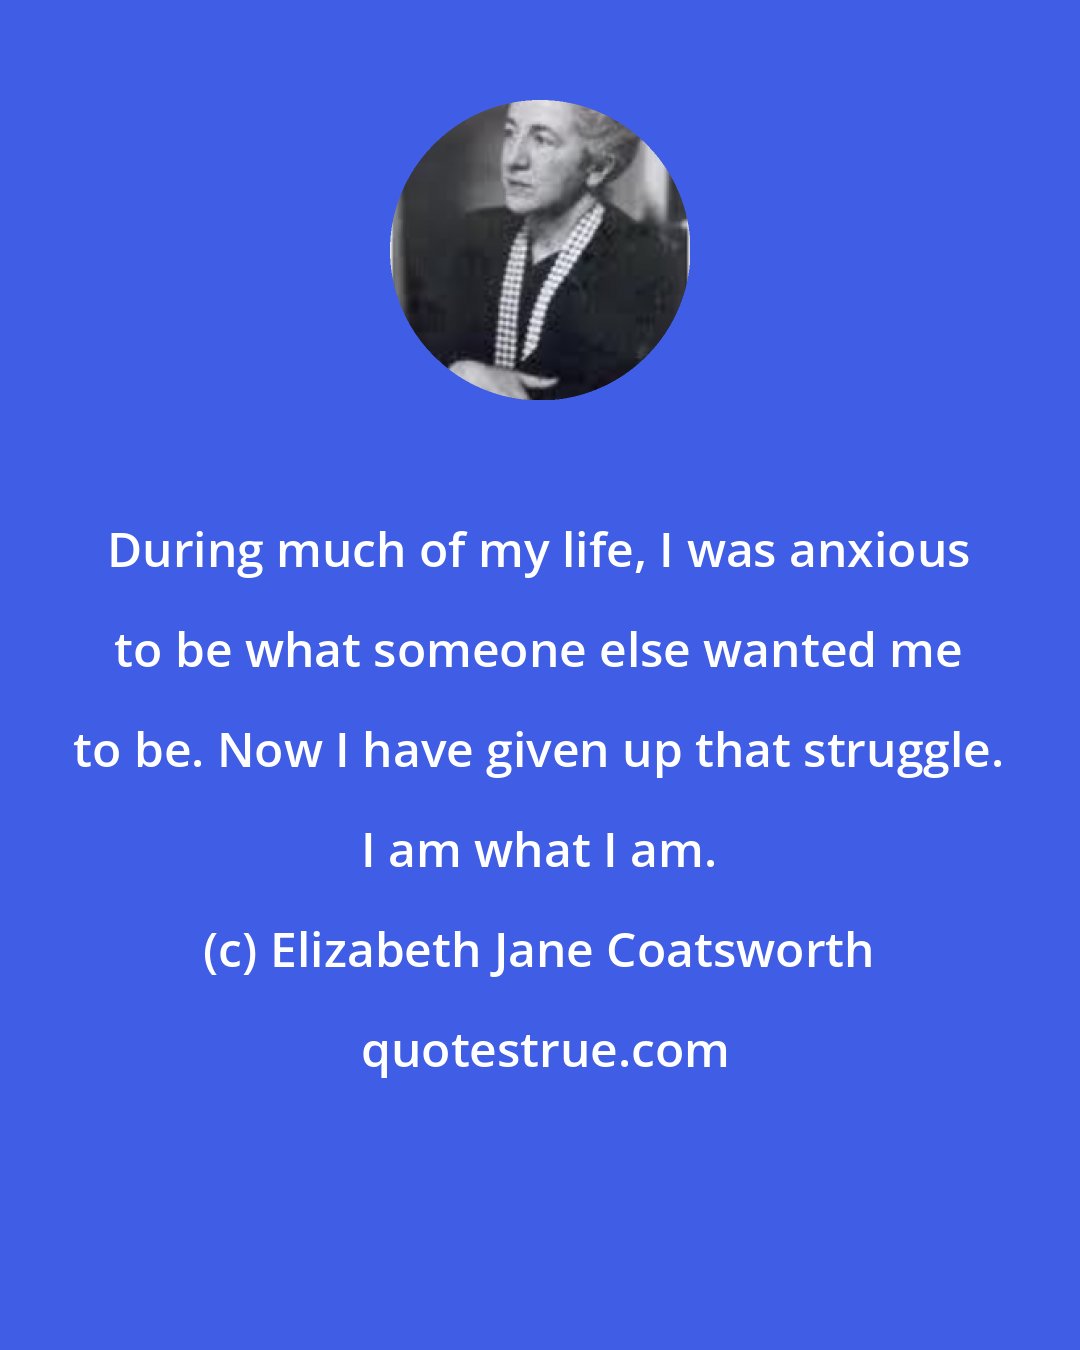 Elizabeth Jane Coatsworth: During much of my life, I was anxious to be what someone else wanted me to be. Now I have given up that struggle. I am what I am.